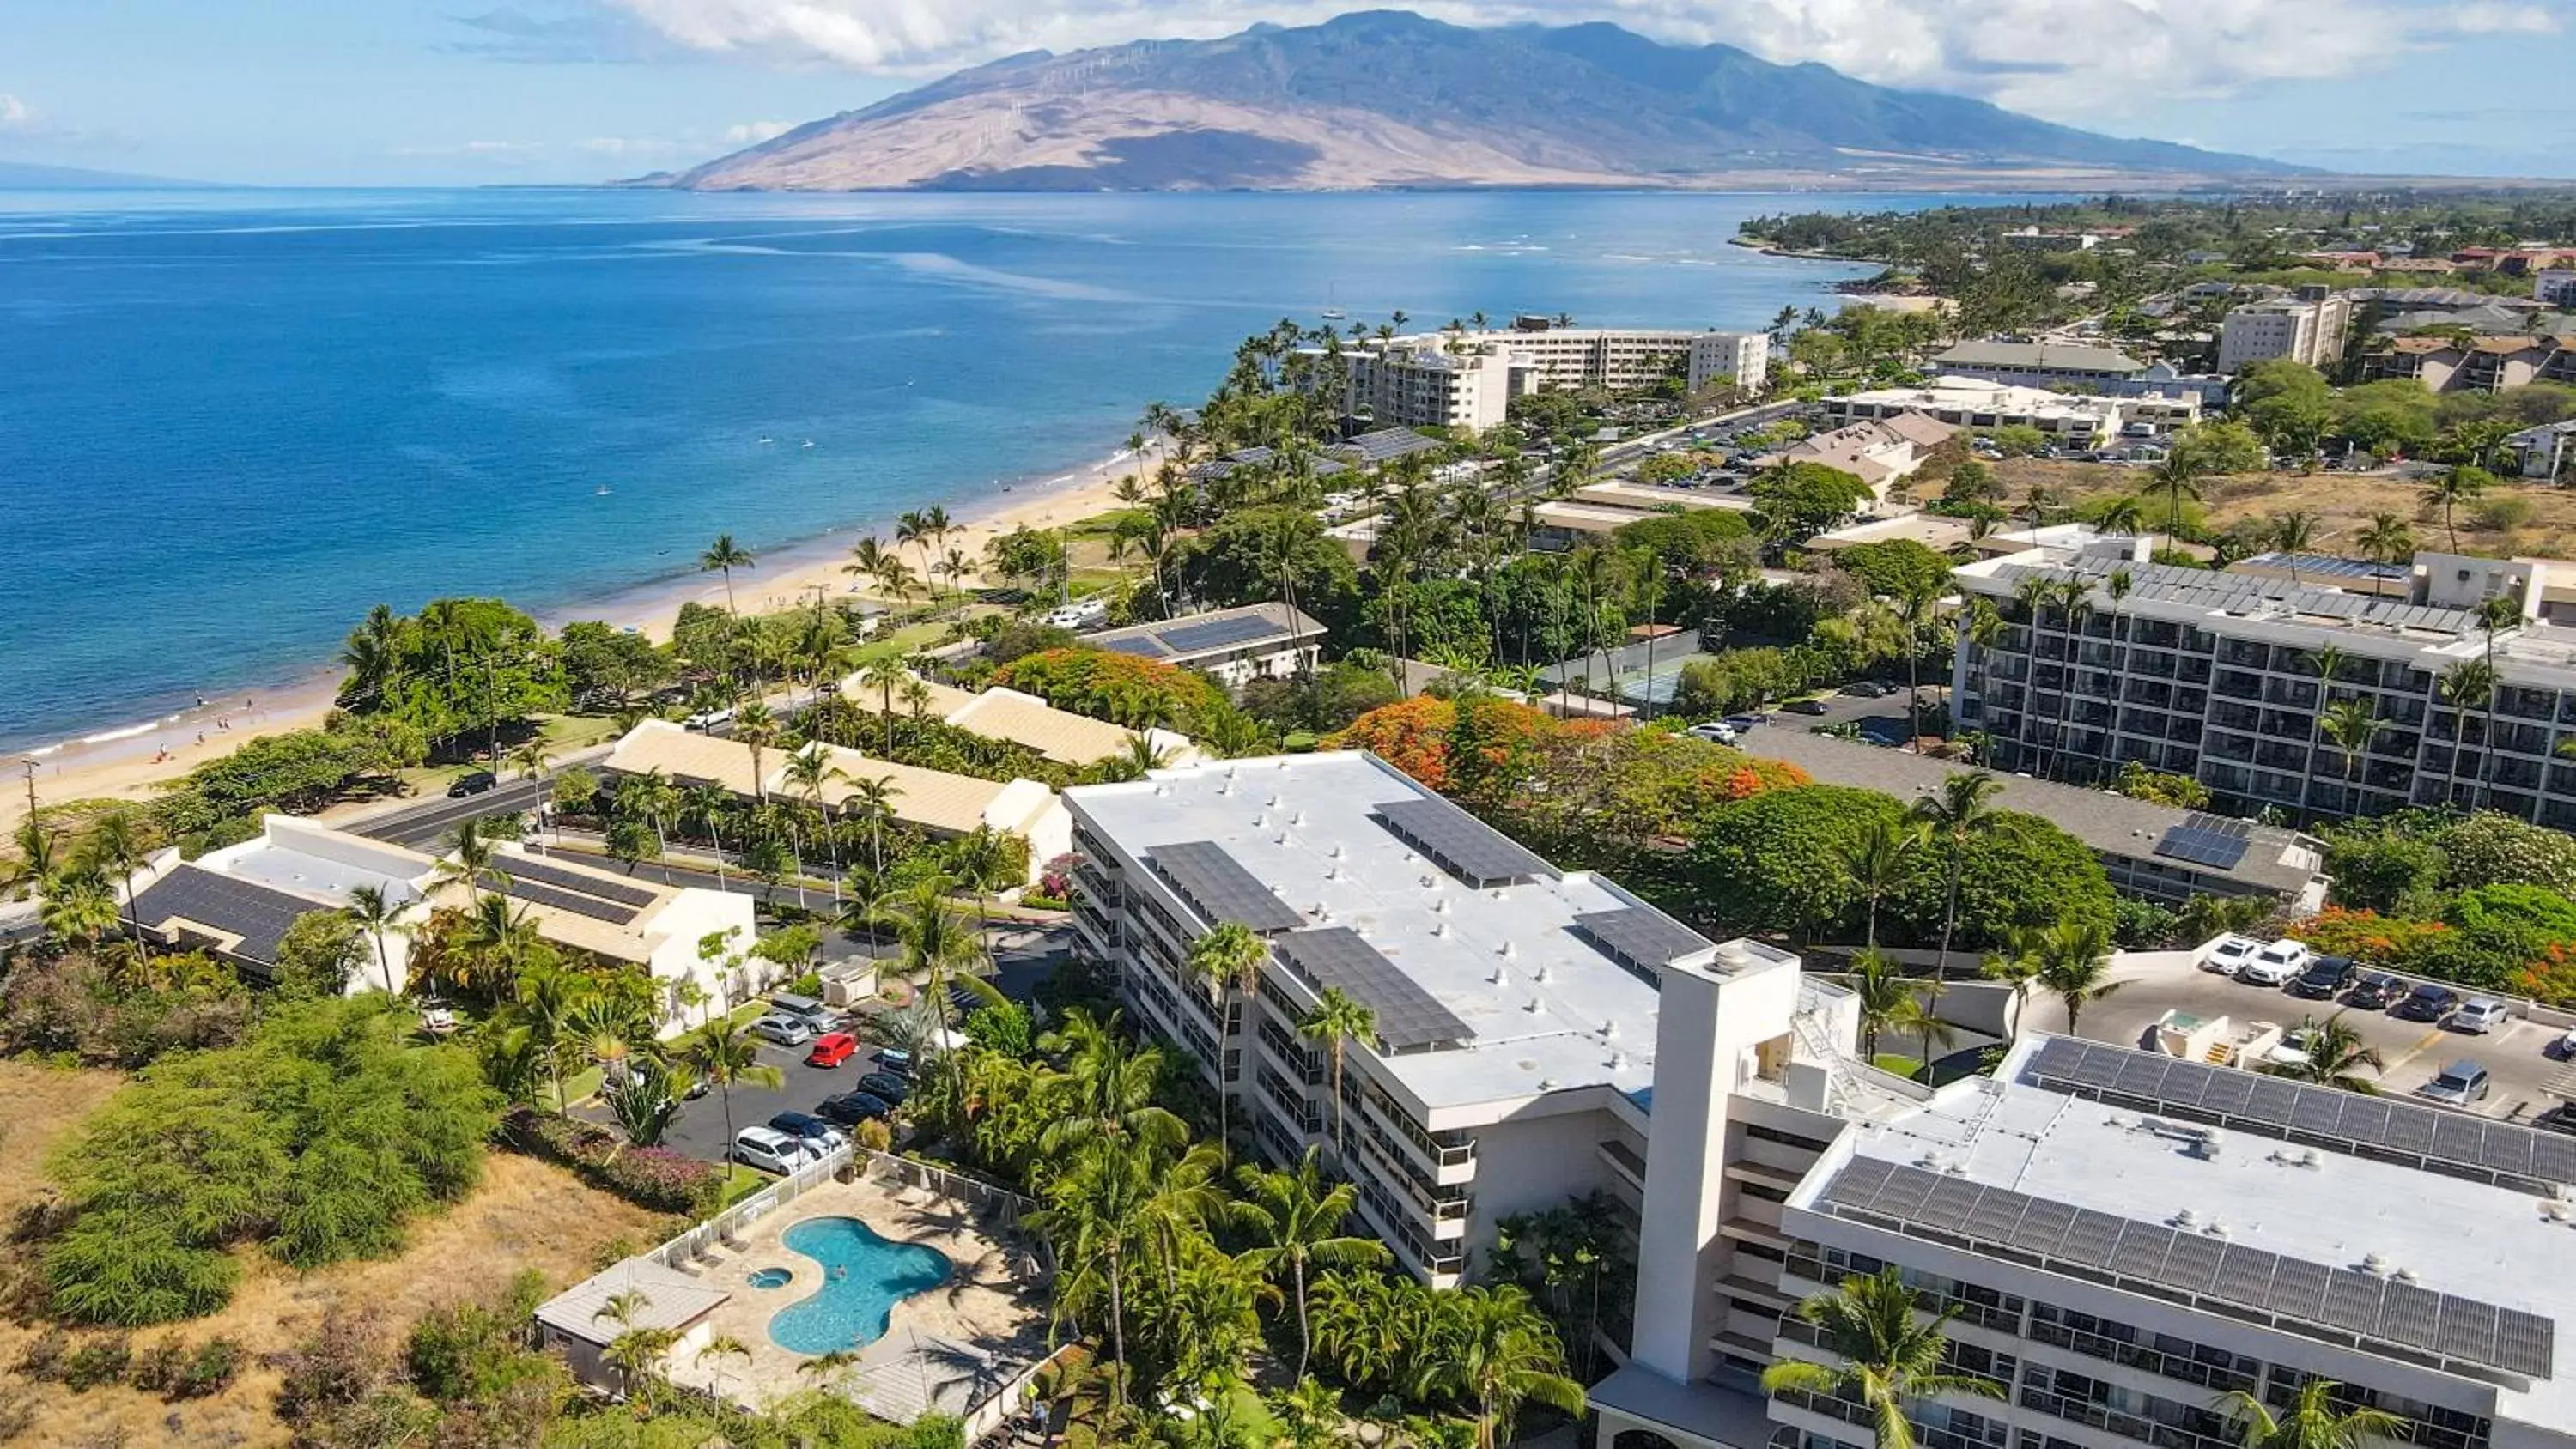 Property building, Bird's-eye View in Aston at the Maui Banyan